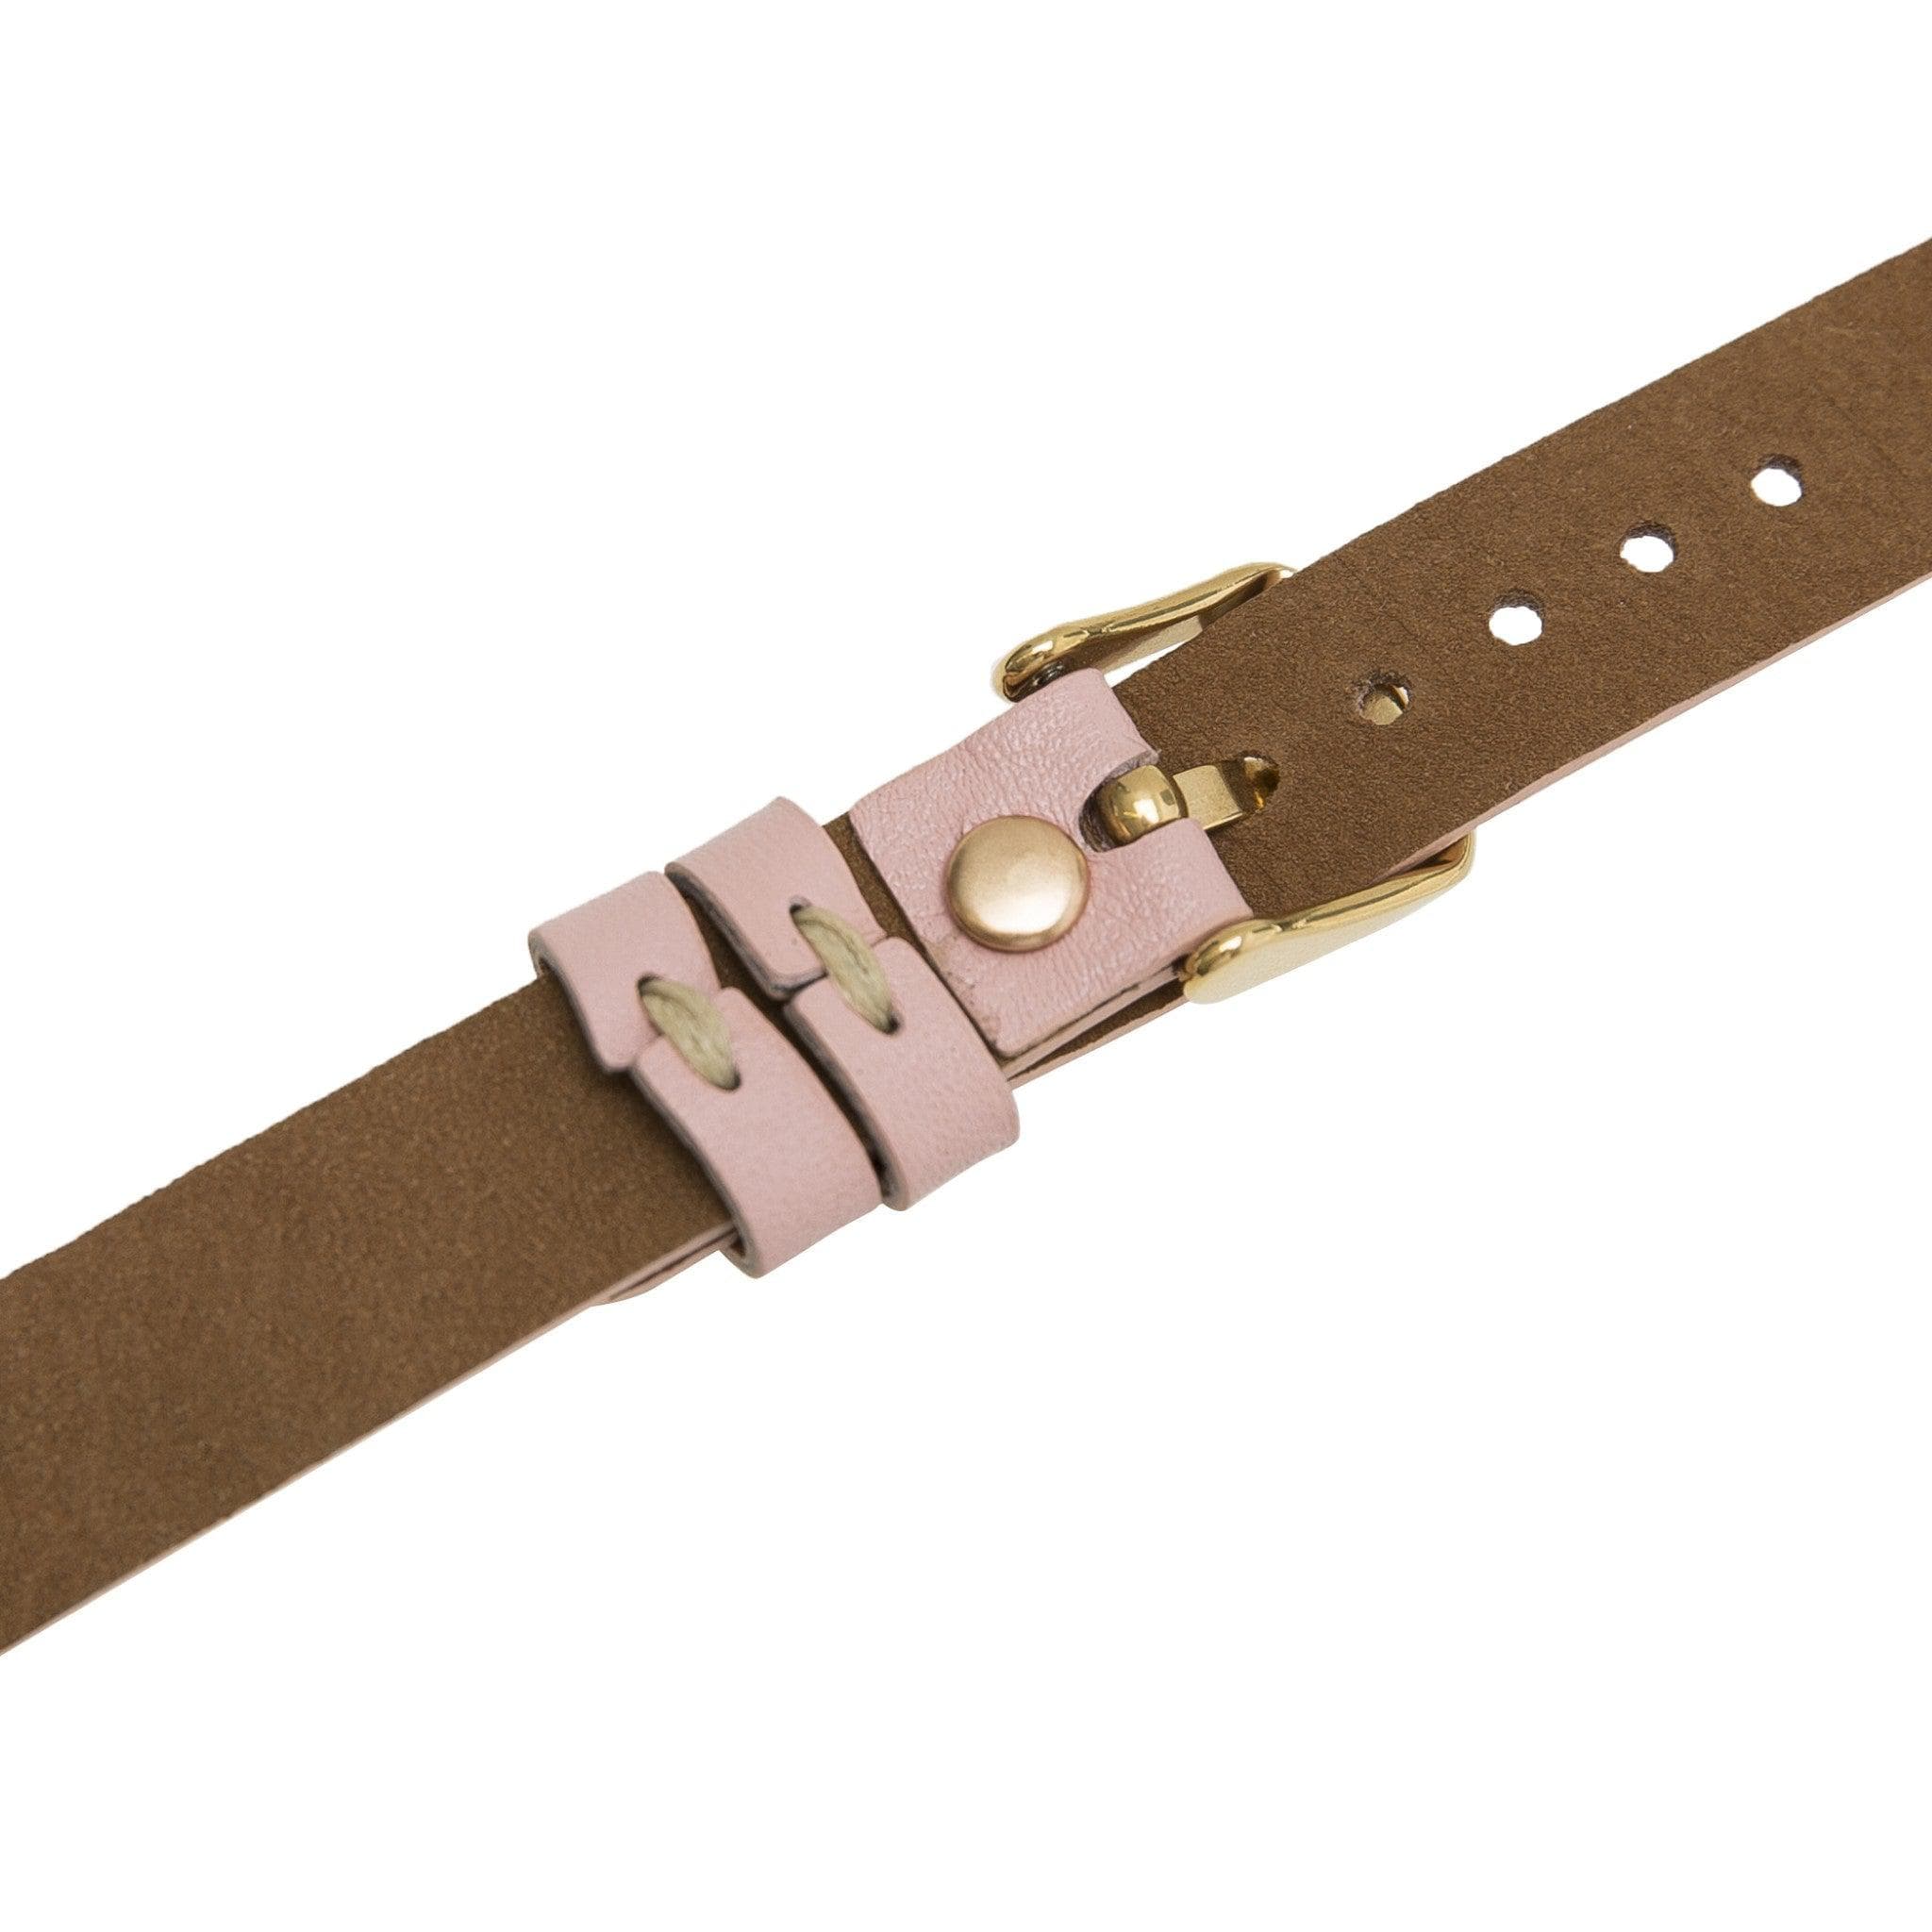 Leeds Double Tour Slim with Rose Gold Bead Apple Watch Leather Straps Bouletta LTD